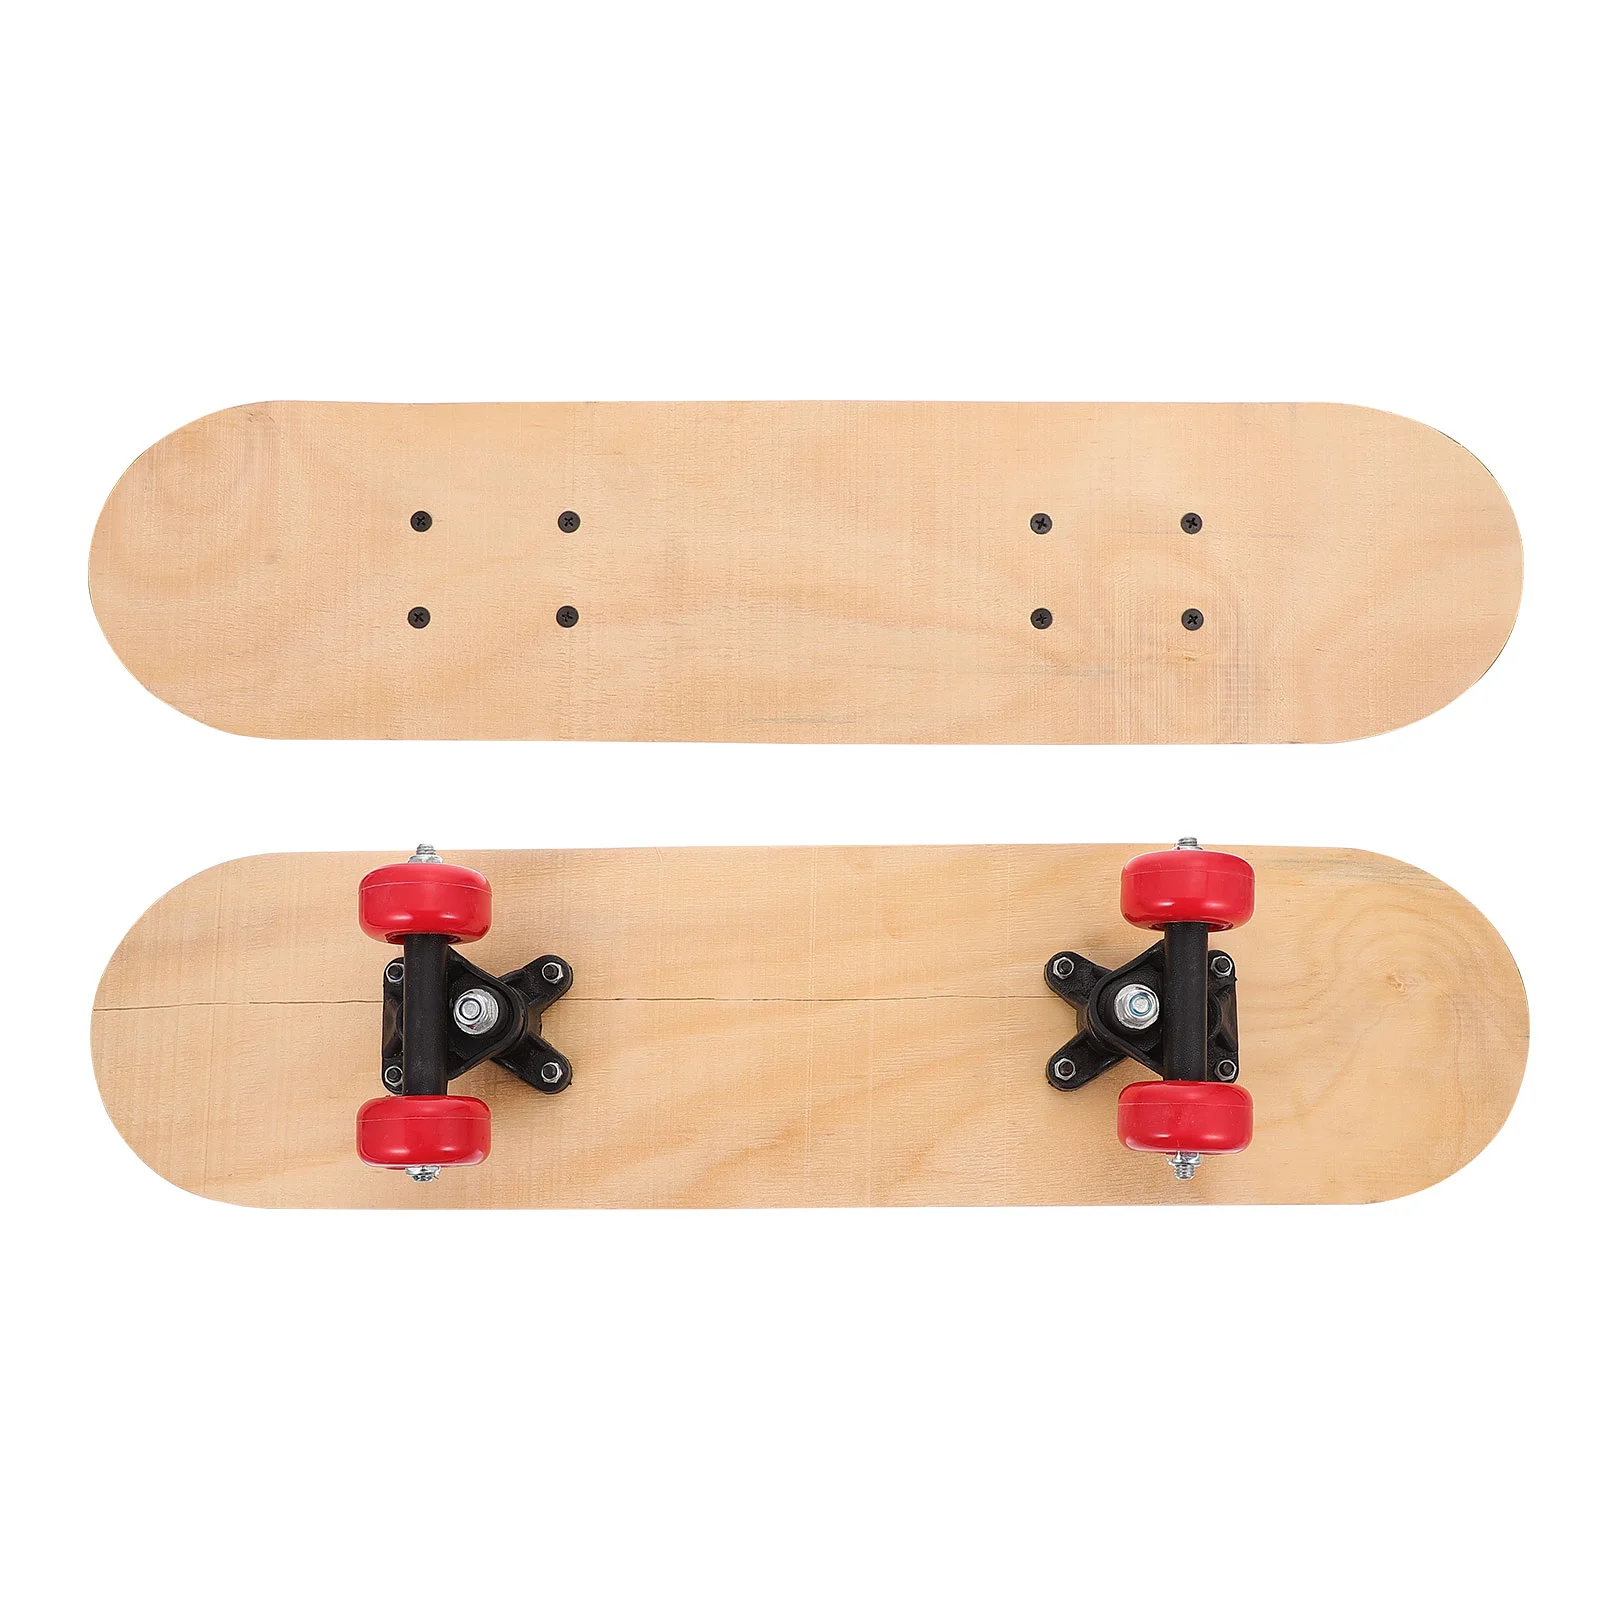 

Hand Drawn Skateboard Flying Toy Skating Accessories Material Graffiti Deck DIY Supplies Wood Wooden Child Painting Blank